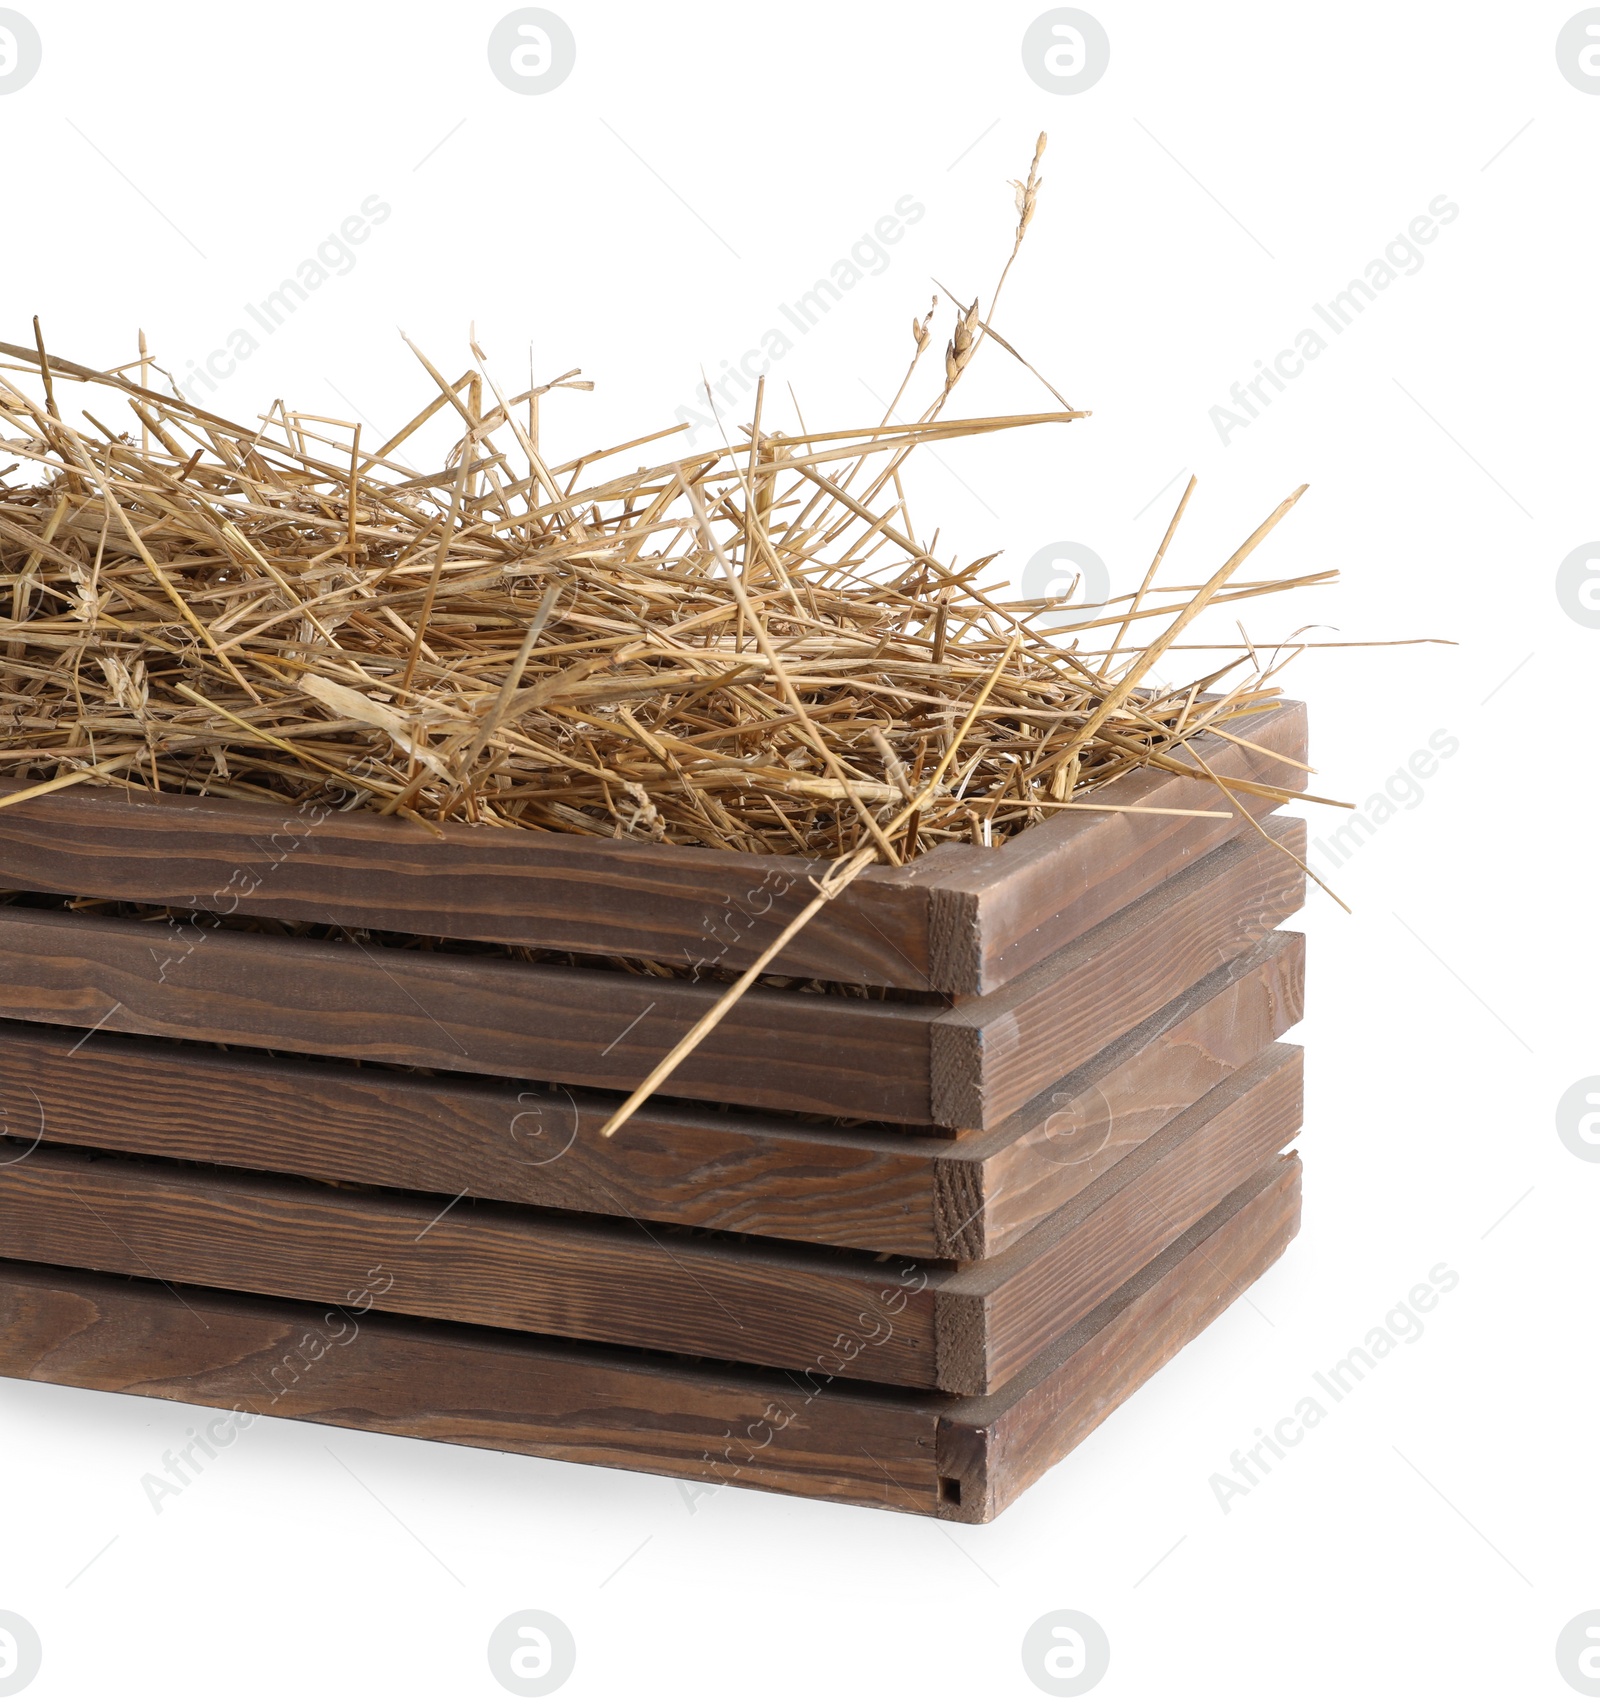 Photo of Dried straw in wooden crate isolated on white